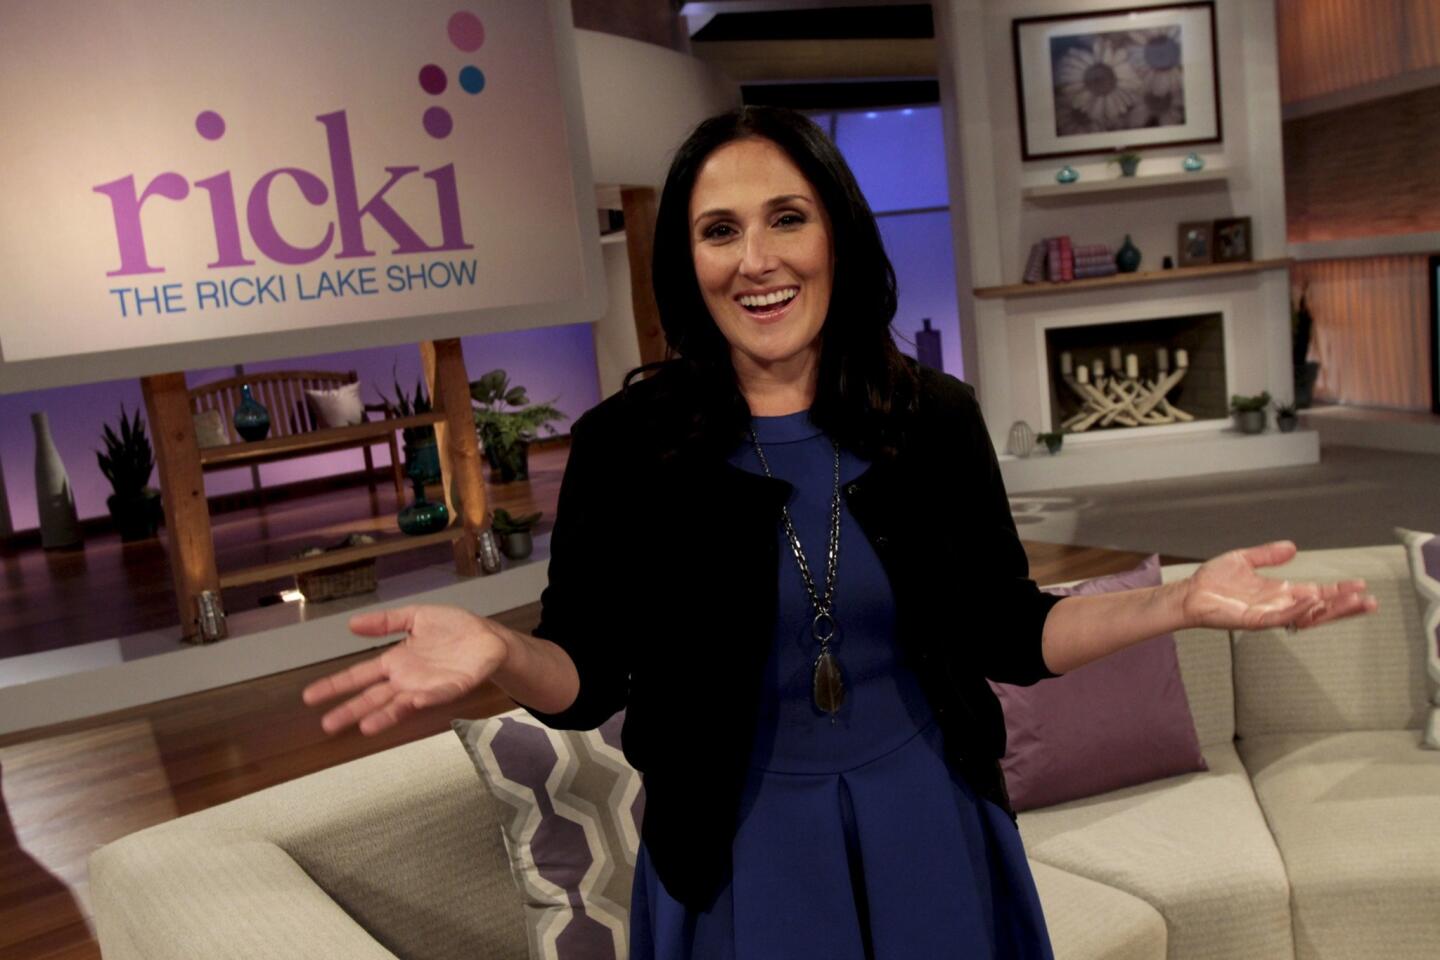 "The Ricki Lake Show," Lake's first return to talk TV since 2004, was nixed after one season due to flat ratings. "Always the underdog. From 'Hairspray' till now, I guess. I'll take it," she tweeted after the cancellation news broke.